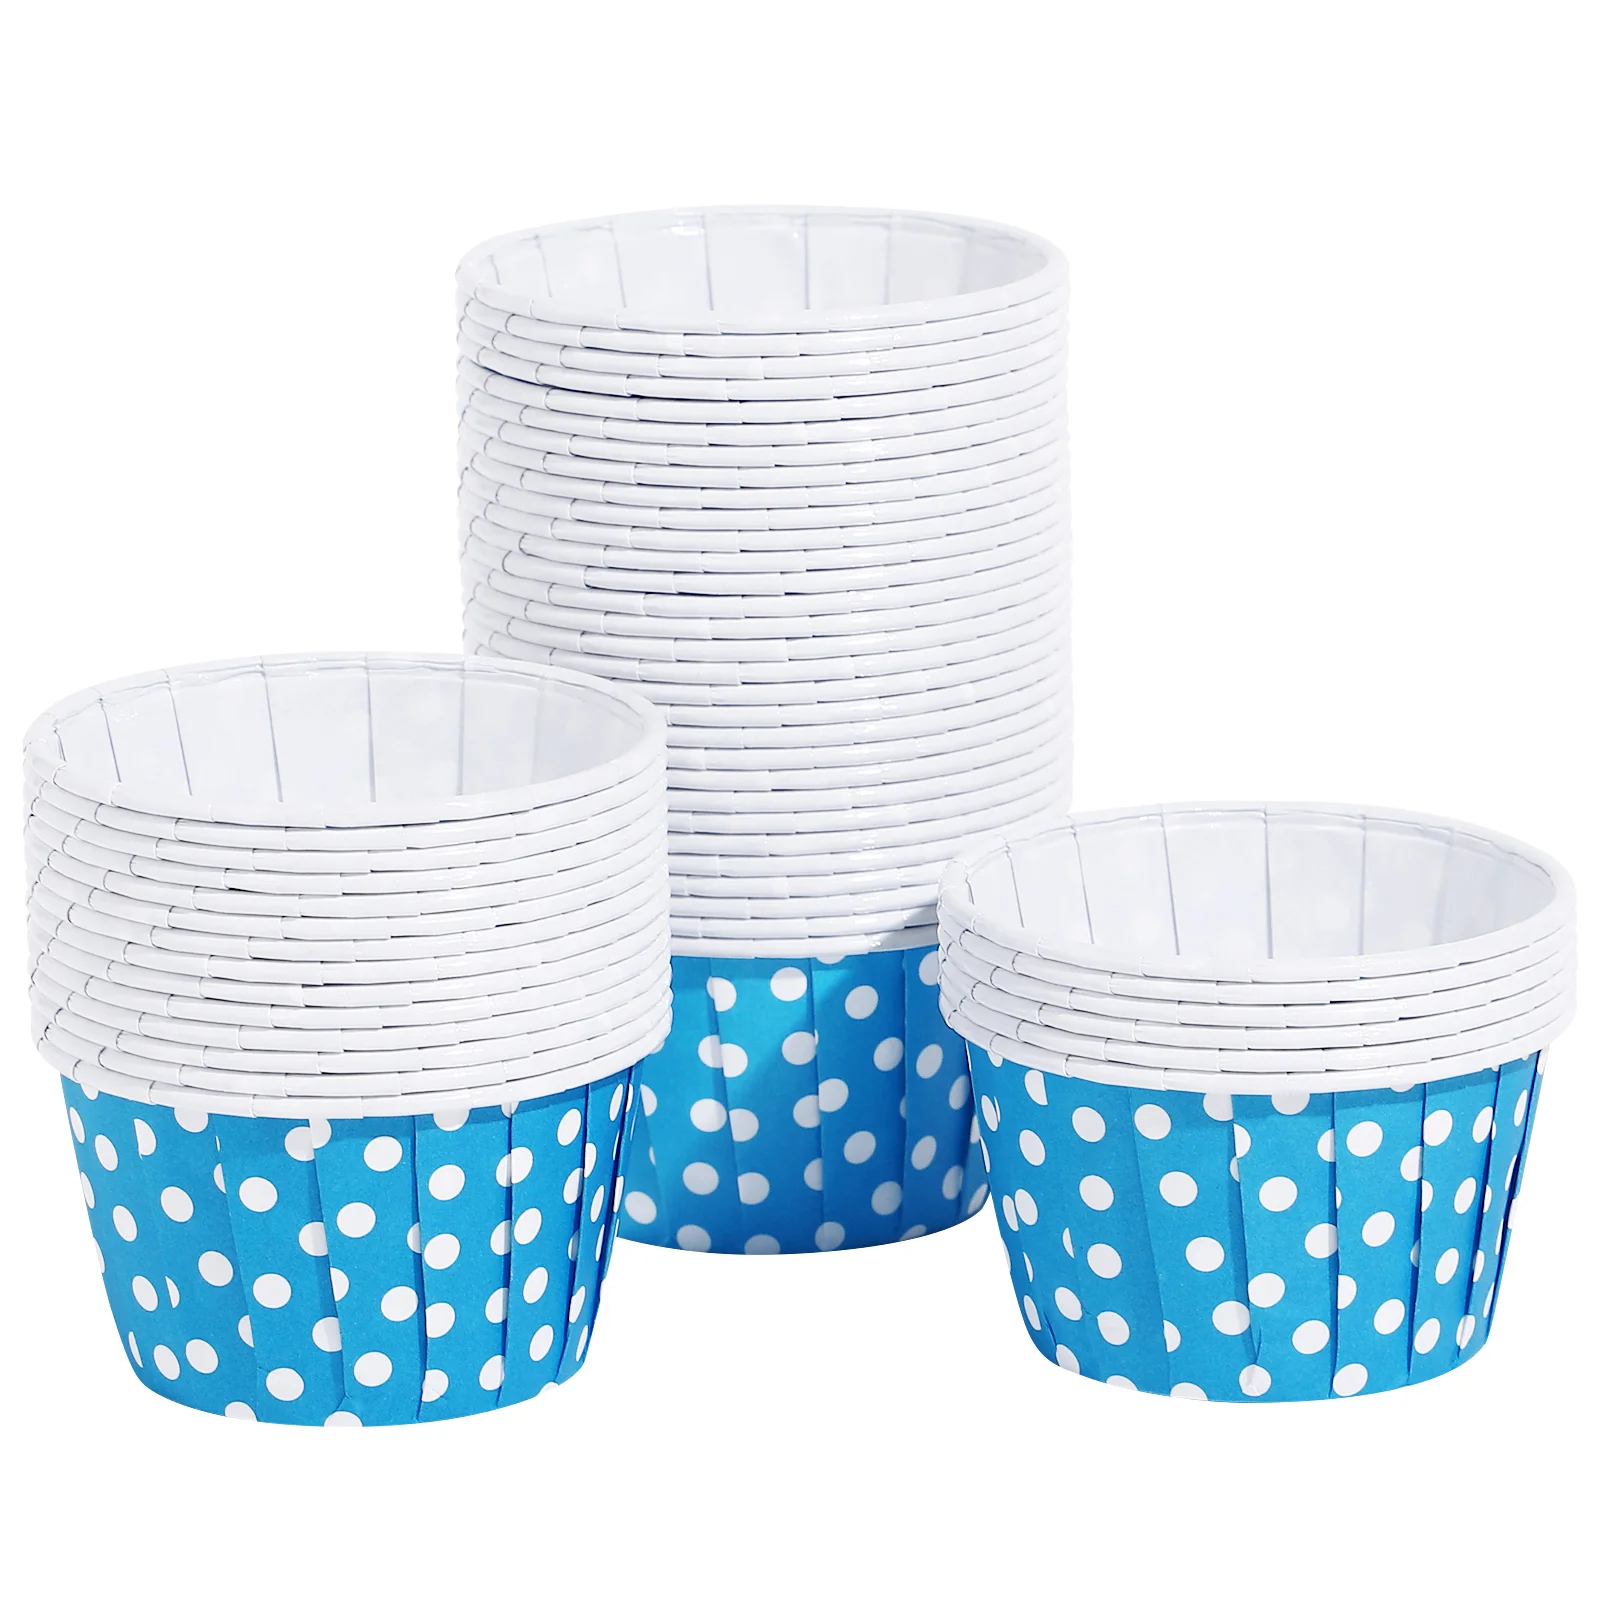 

100pcs Muffin Liners Paper Muffin Cups Baking Cupcake Wrappers Heat Resistant Cupcake Holder (Random Color)